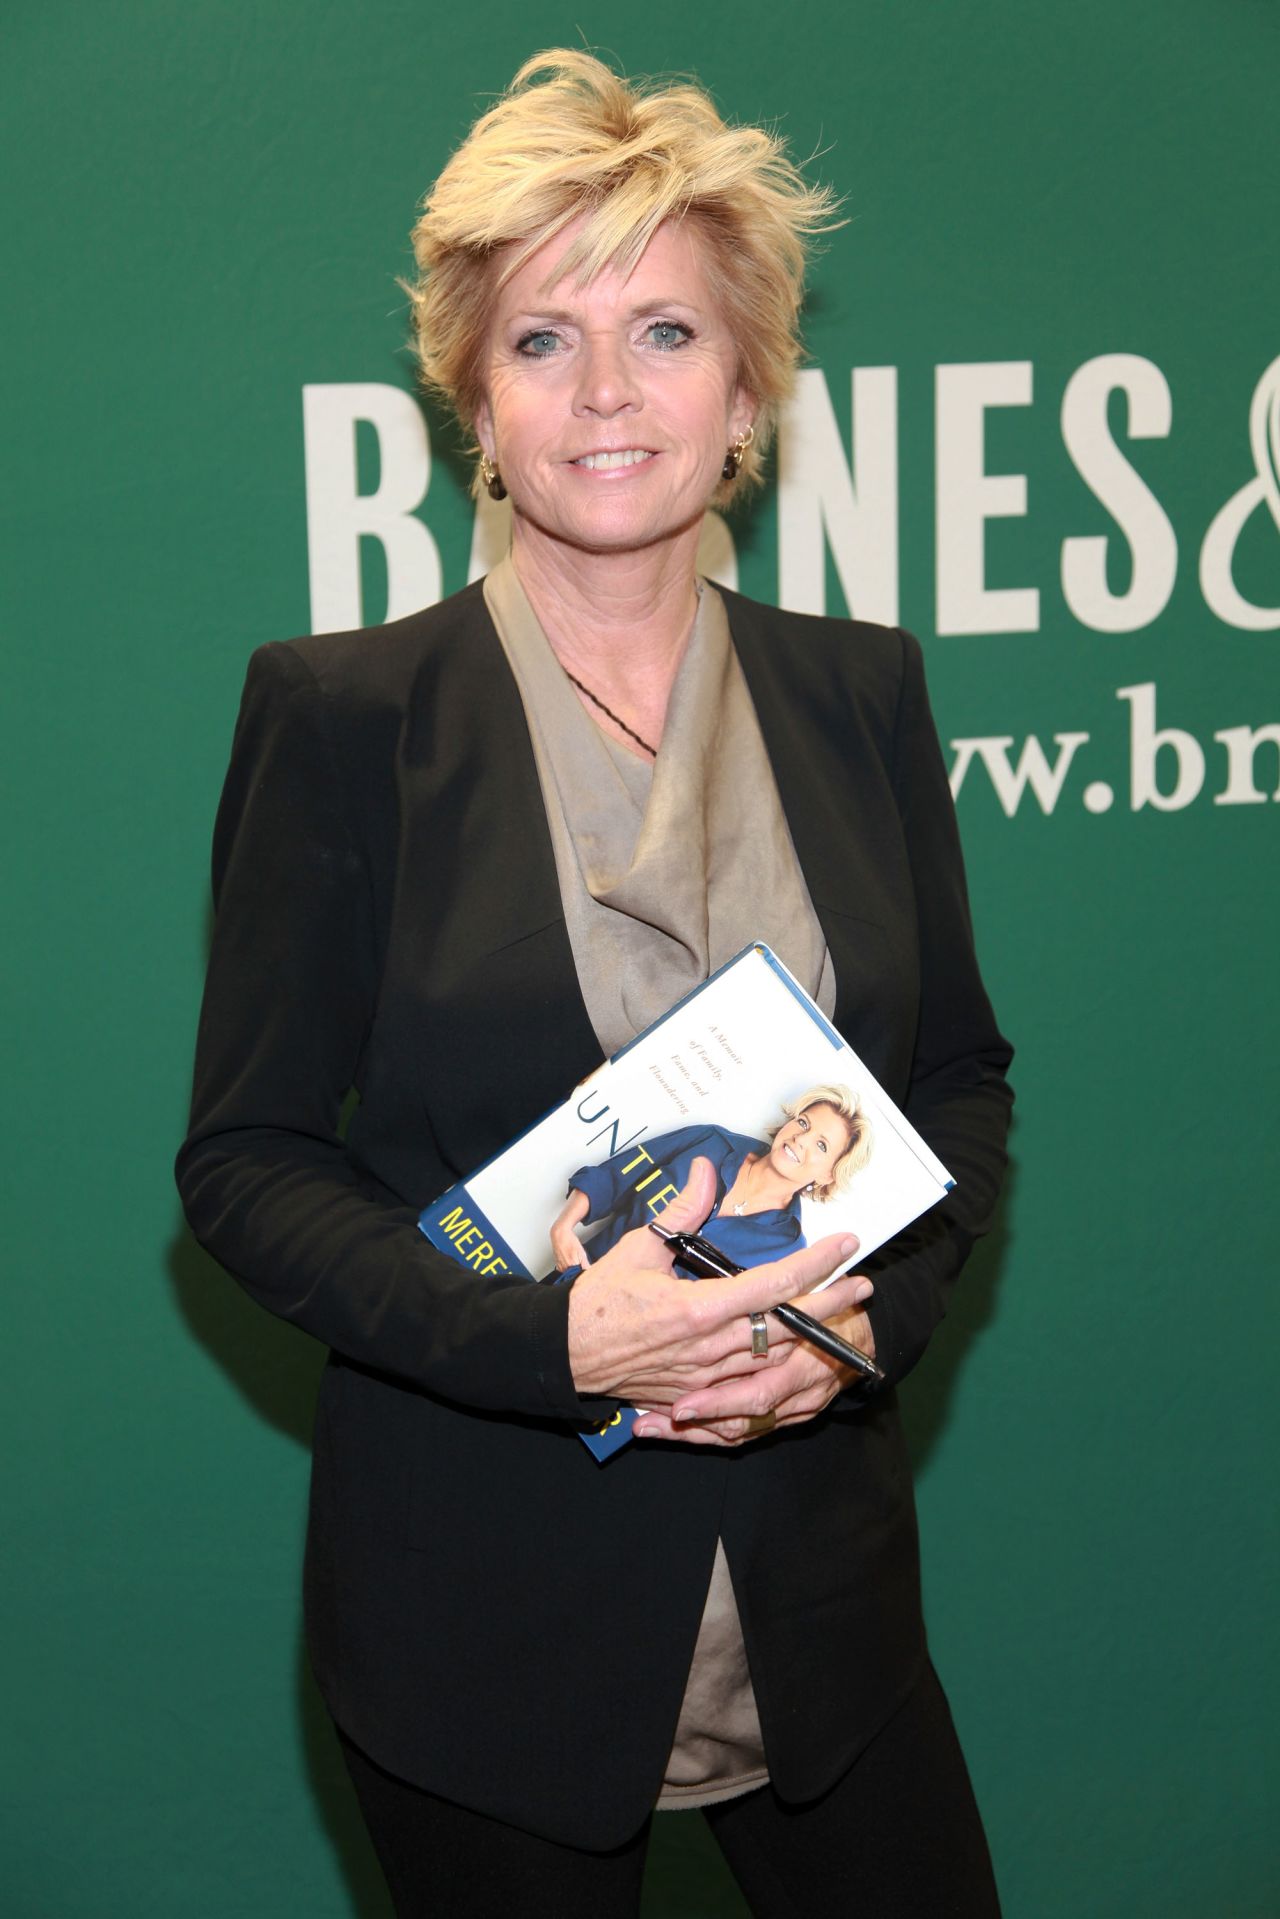 "Family Ties" actress Meredith Baxter confirmed in December 2009 rumors that she is a lesbian. "Anyone who's a friend of mine, anyone who knows and cares about me, knows," the actress explained to Matt Lauer on the "Today" show. "It's no secret that I'm gay, but it has been to the greater world." Baxter is in a long-term relationship with a building contractor, Nancy Locke.